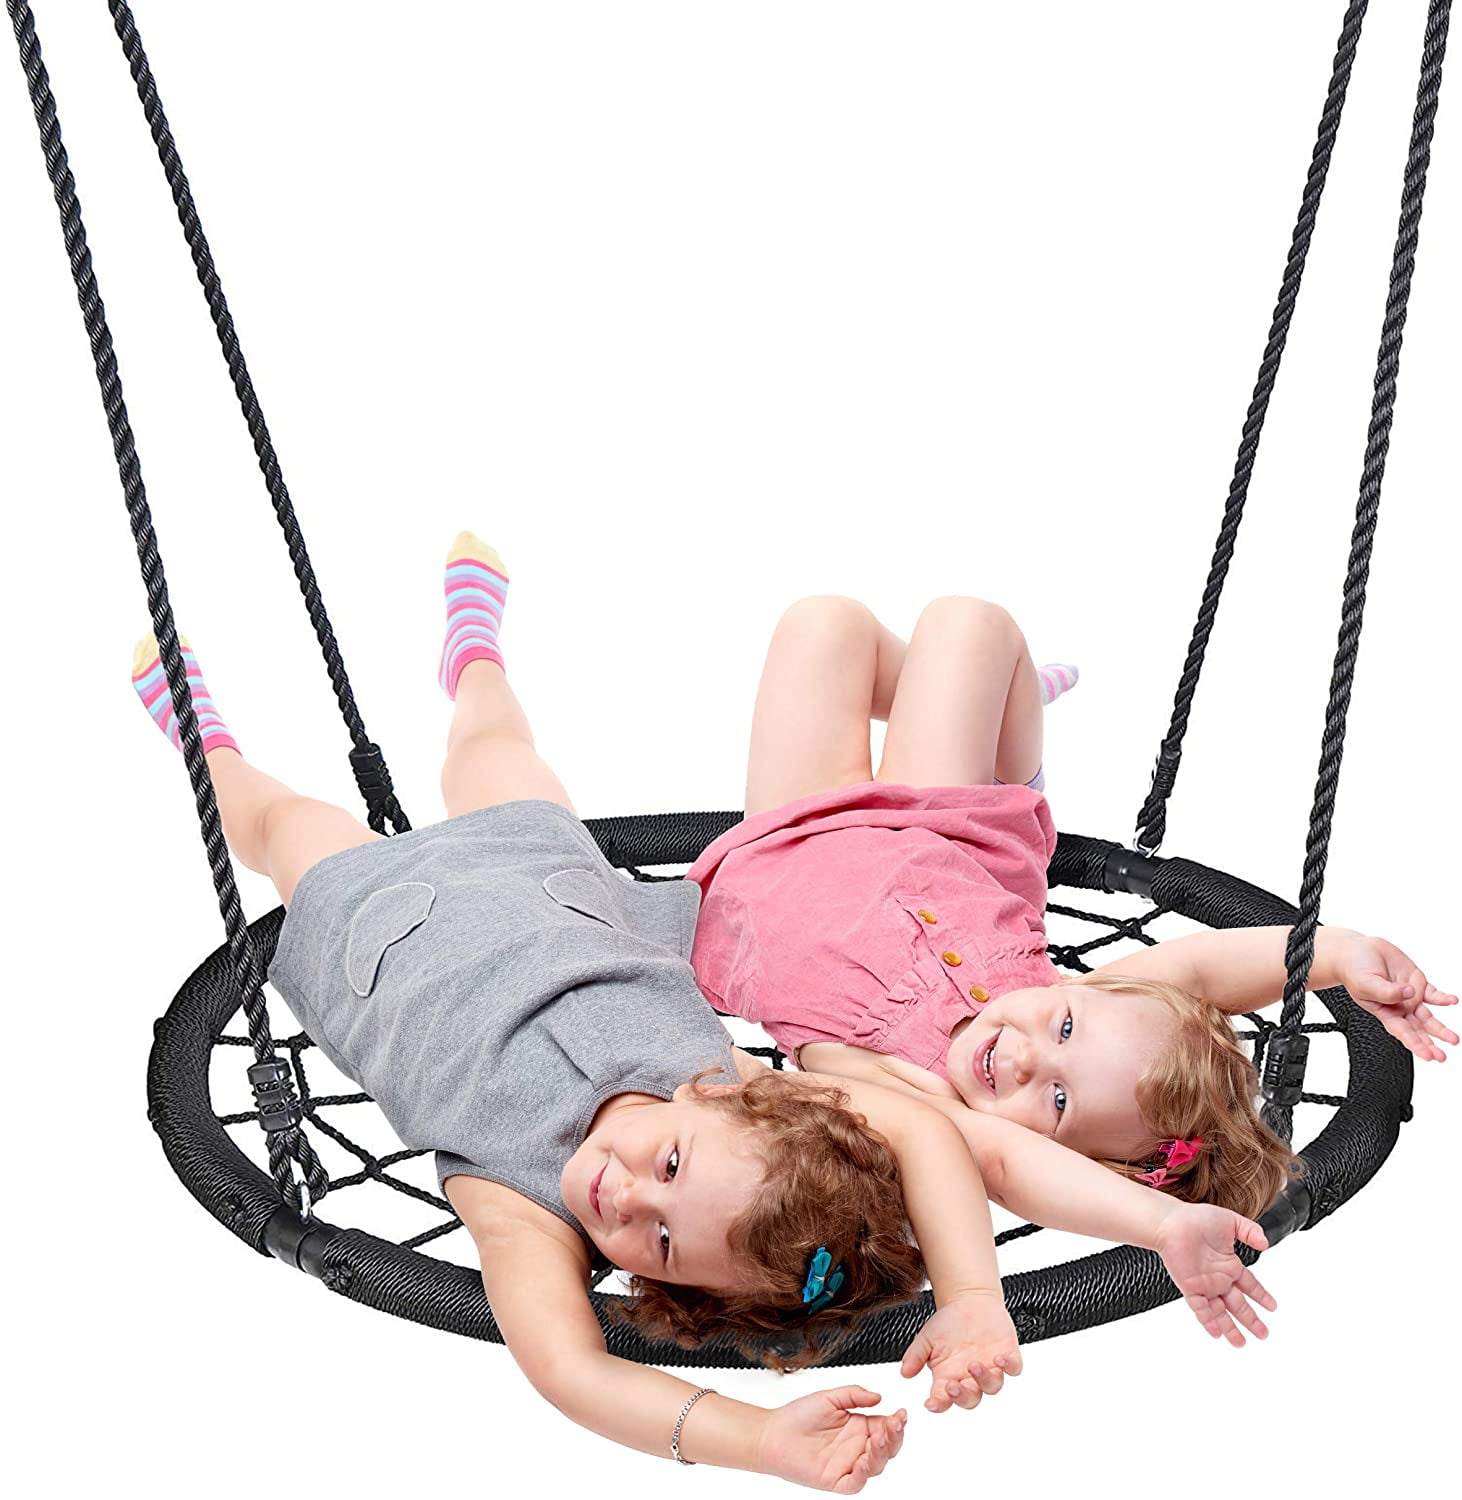 Details about   40" Kids Round Spider Web Swing Outdoor Tree Swing Seat Adjustable Hanging Xmas 